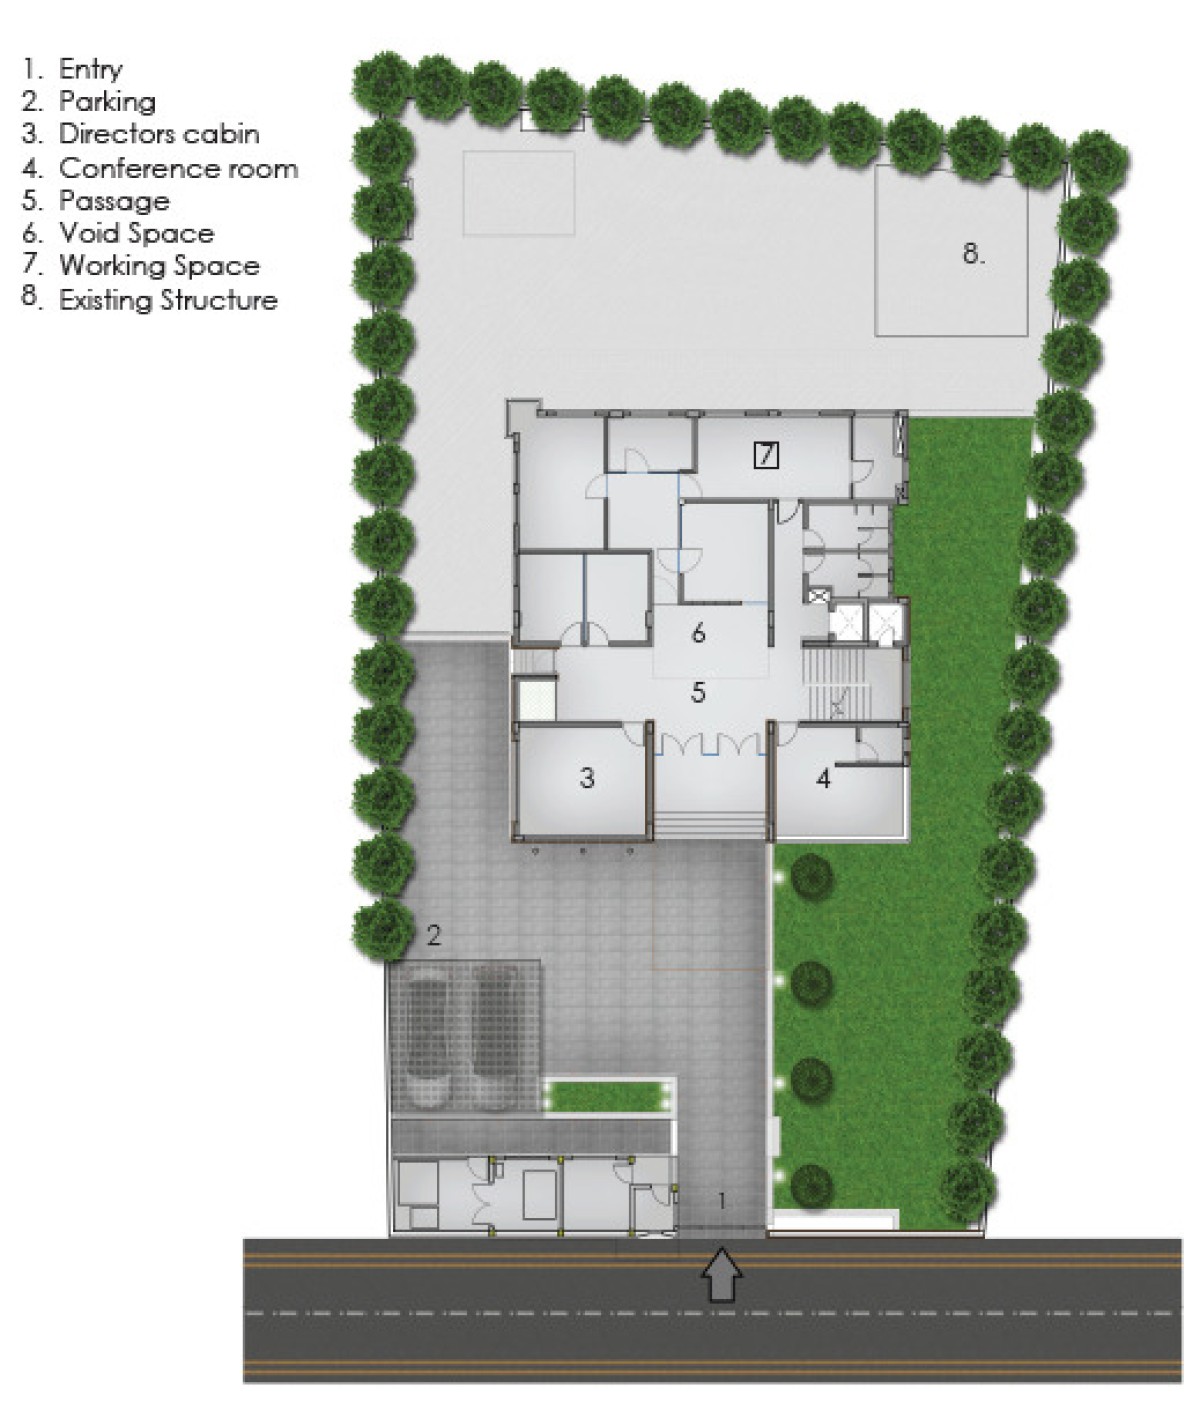 Site plan of The Building on a street, RBL Udaipur by Studio Design Inc